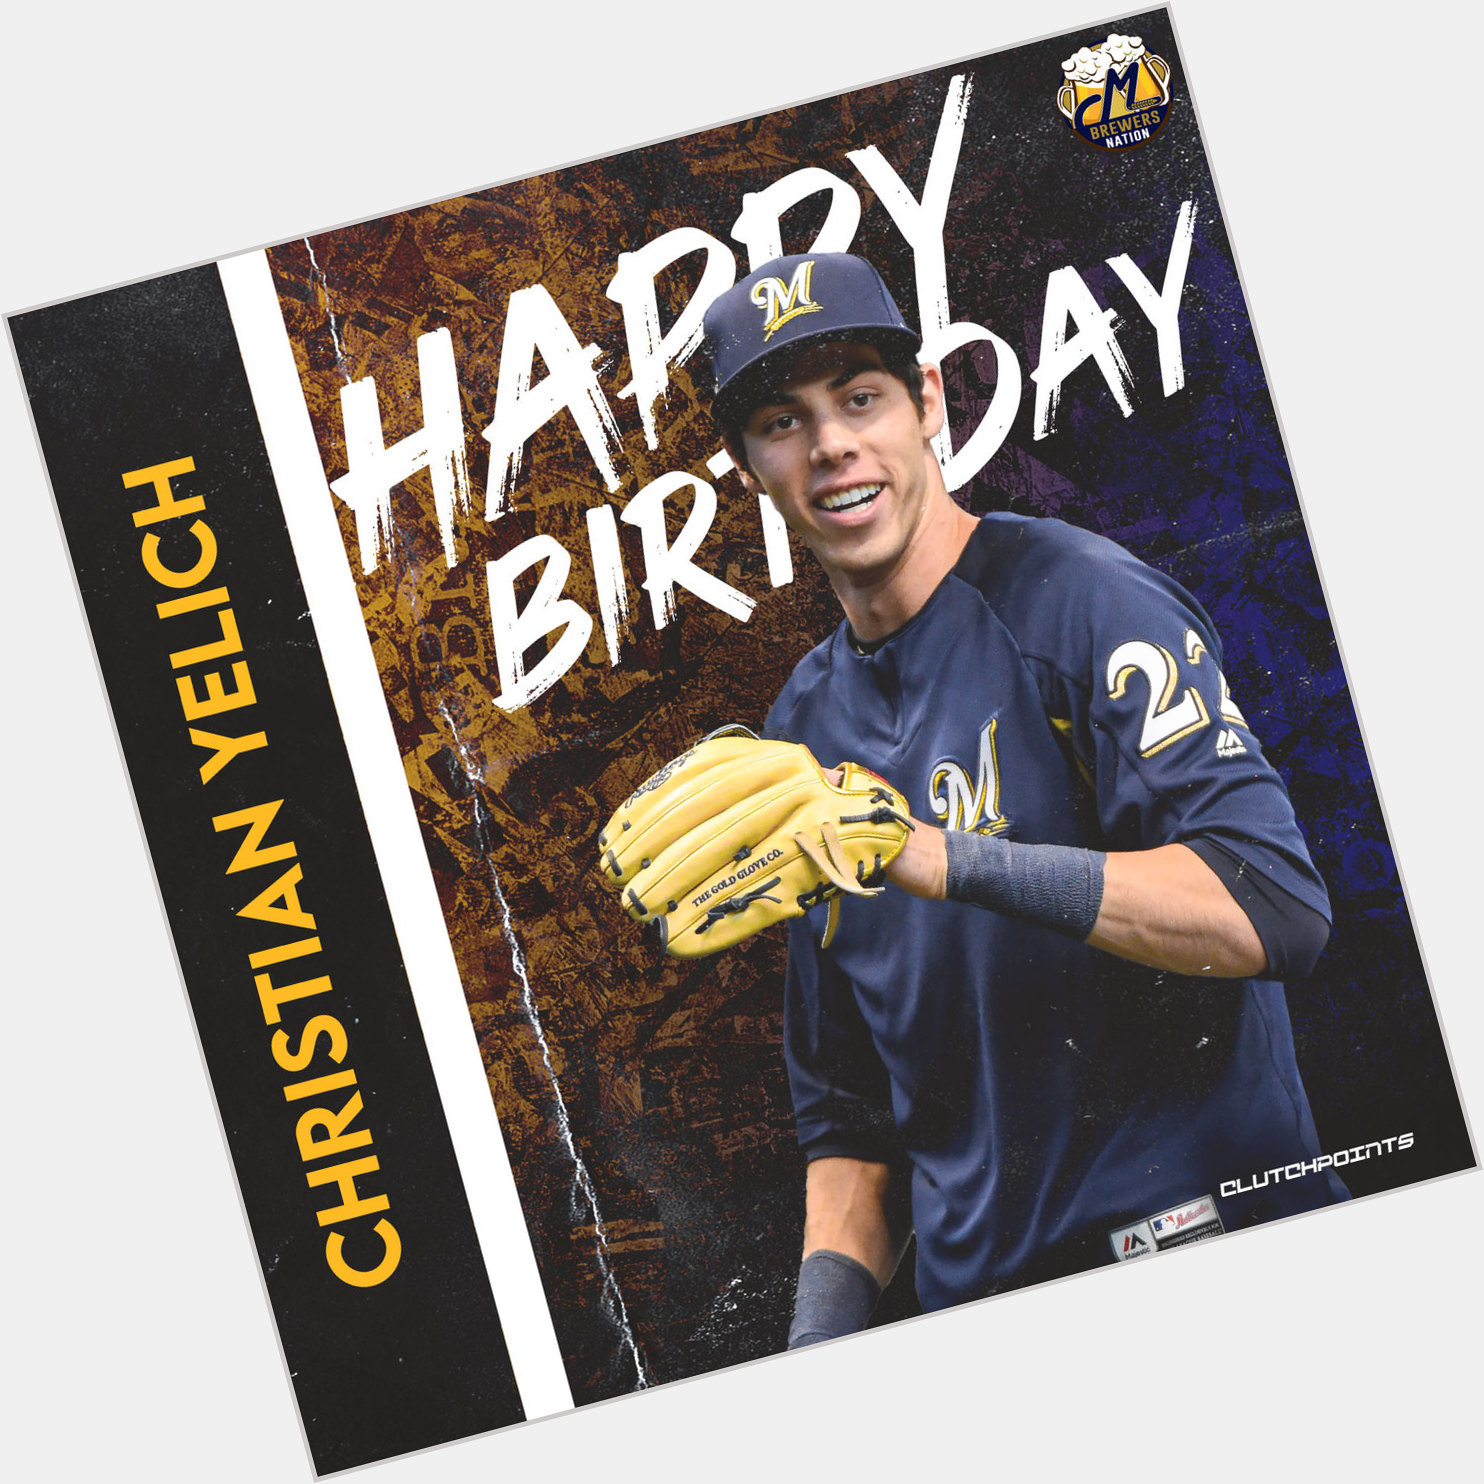 Let s all wish Christian Yelich a happy 30th birthday! 